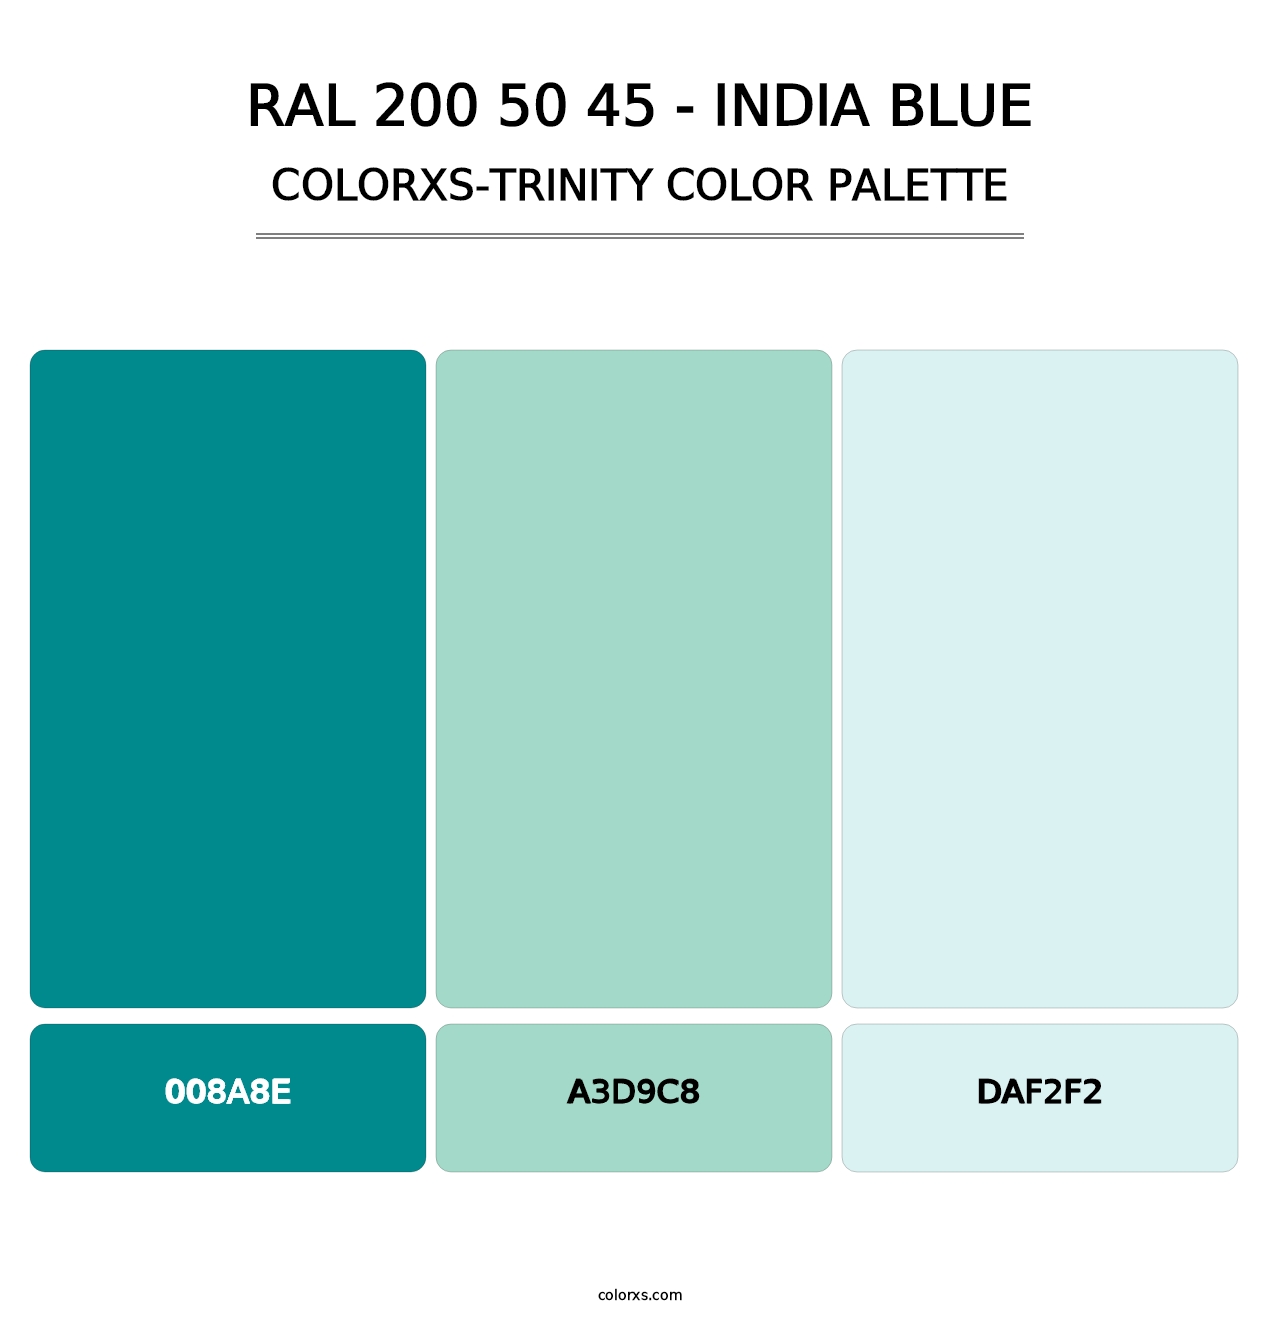 RAL 200 50 45 - India Blue - Colorxs Trinity Palette